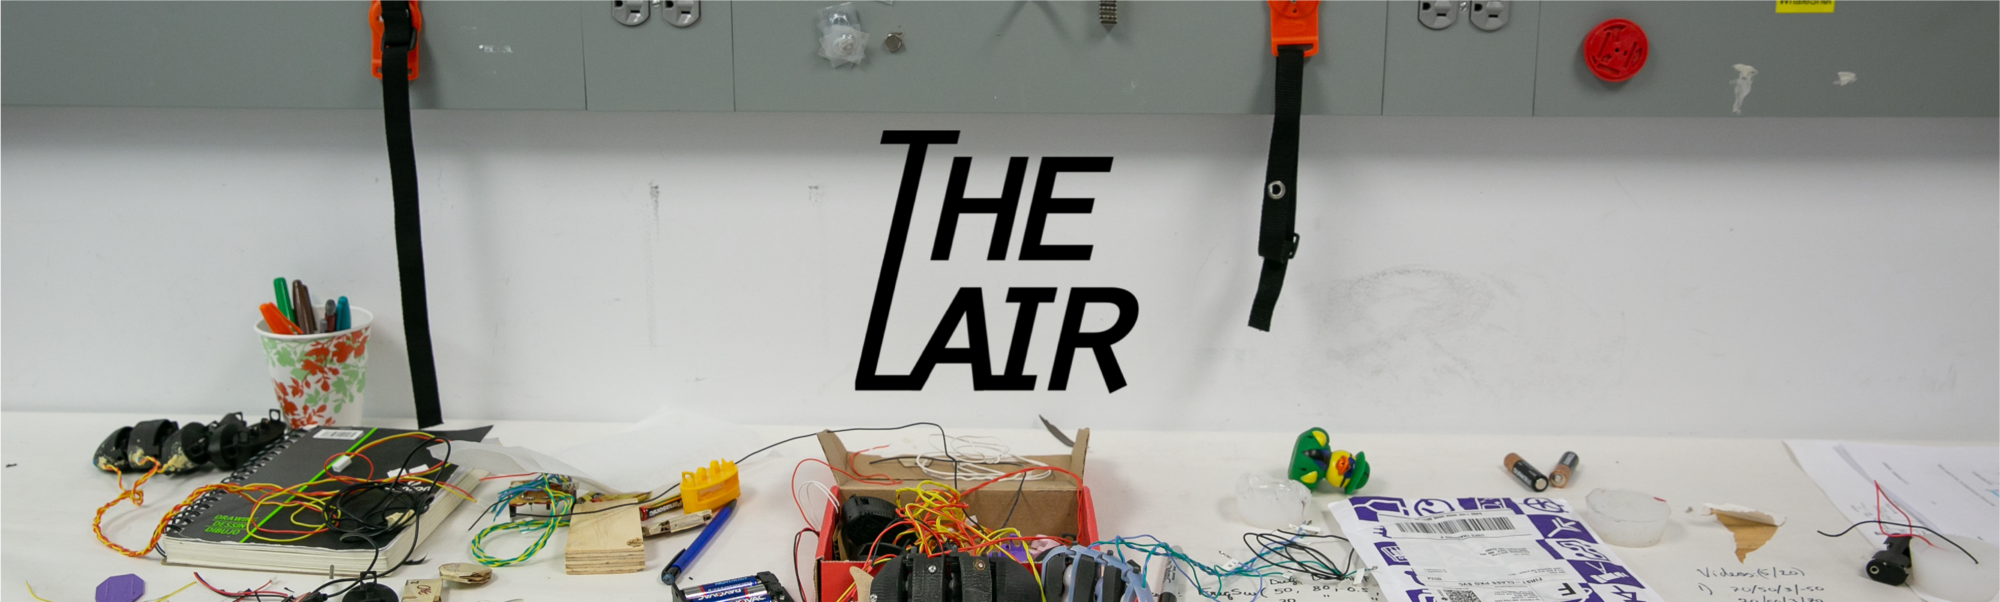 Banner with the Olin College LAIR logo, a stylized version of the words "The Lair," over a background of a cluttered lab bench.